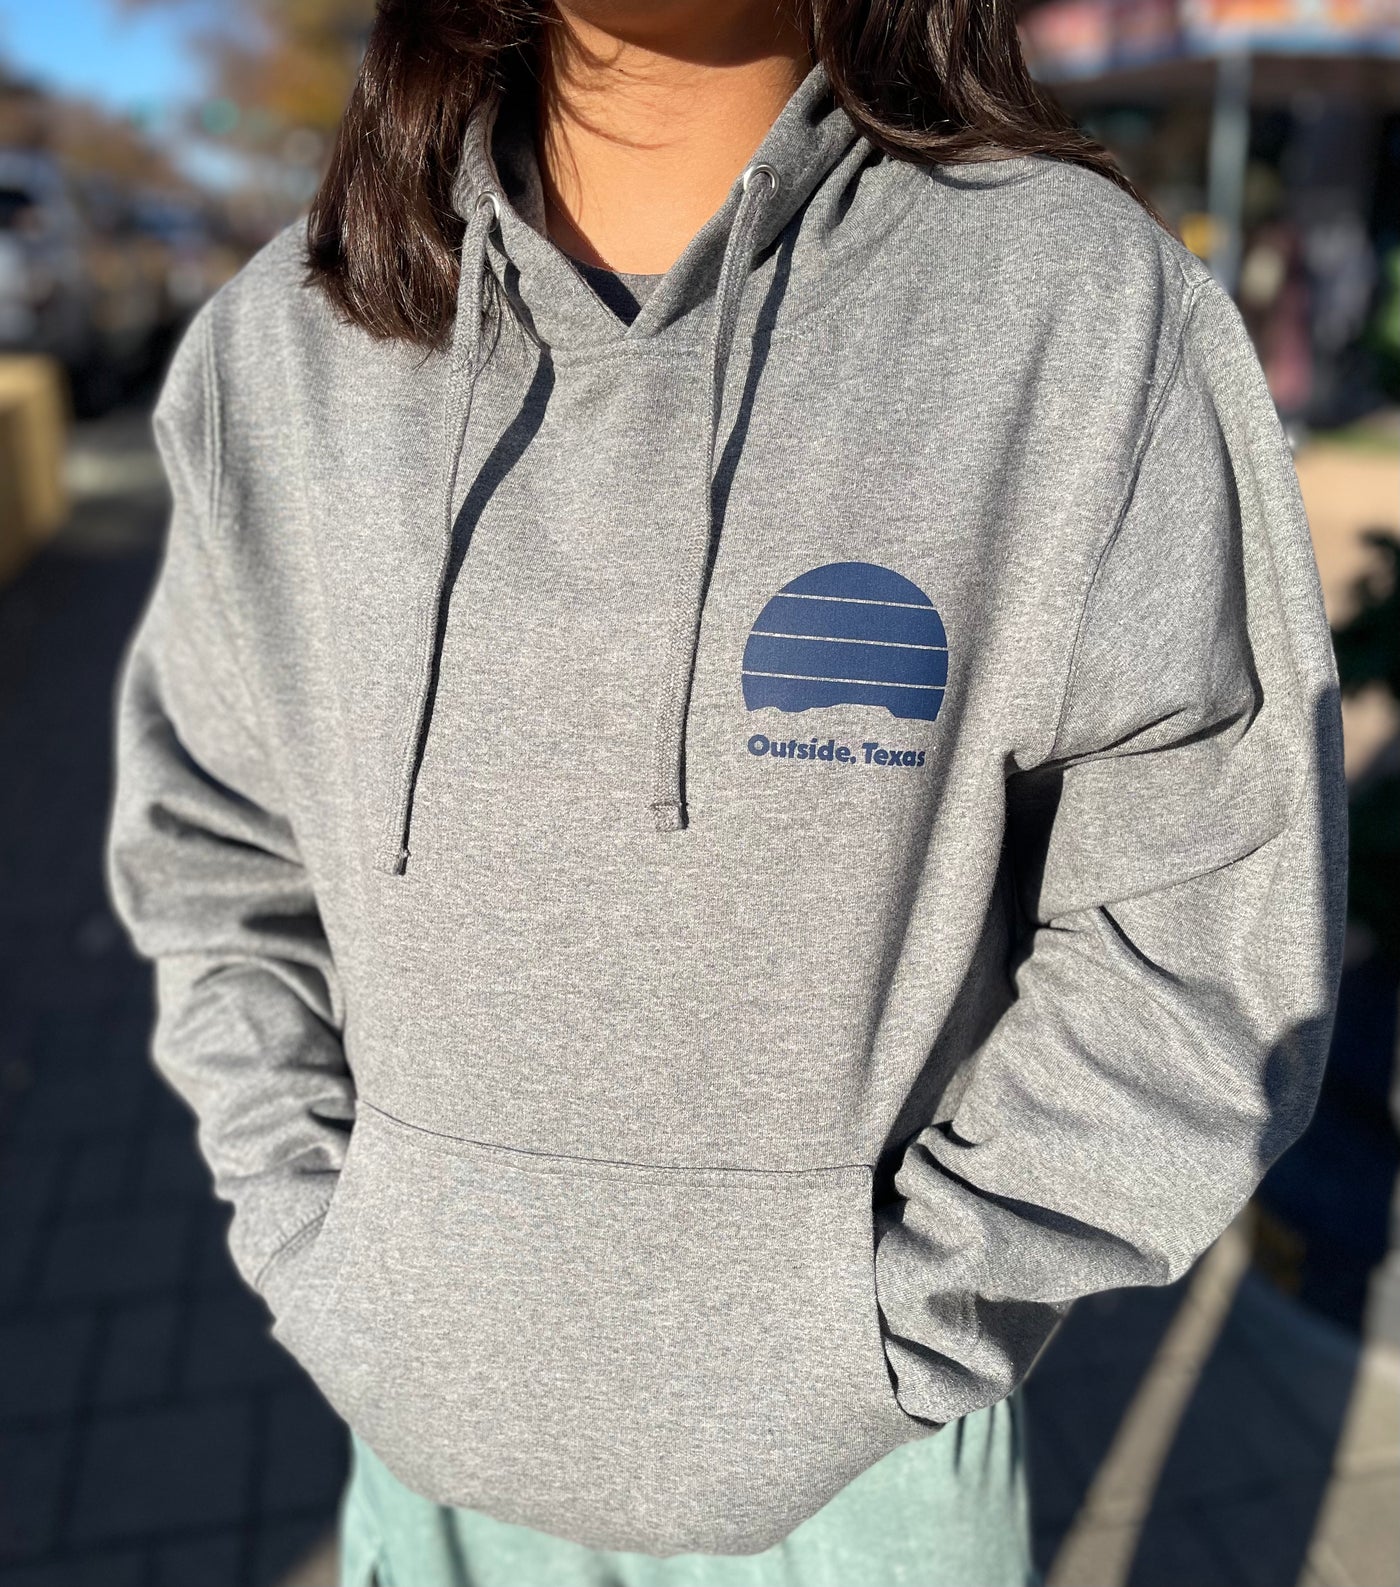 OTX Stamp Hoodie - Outside, Texas